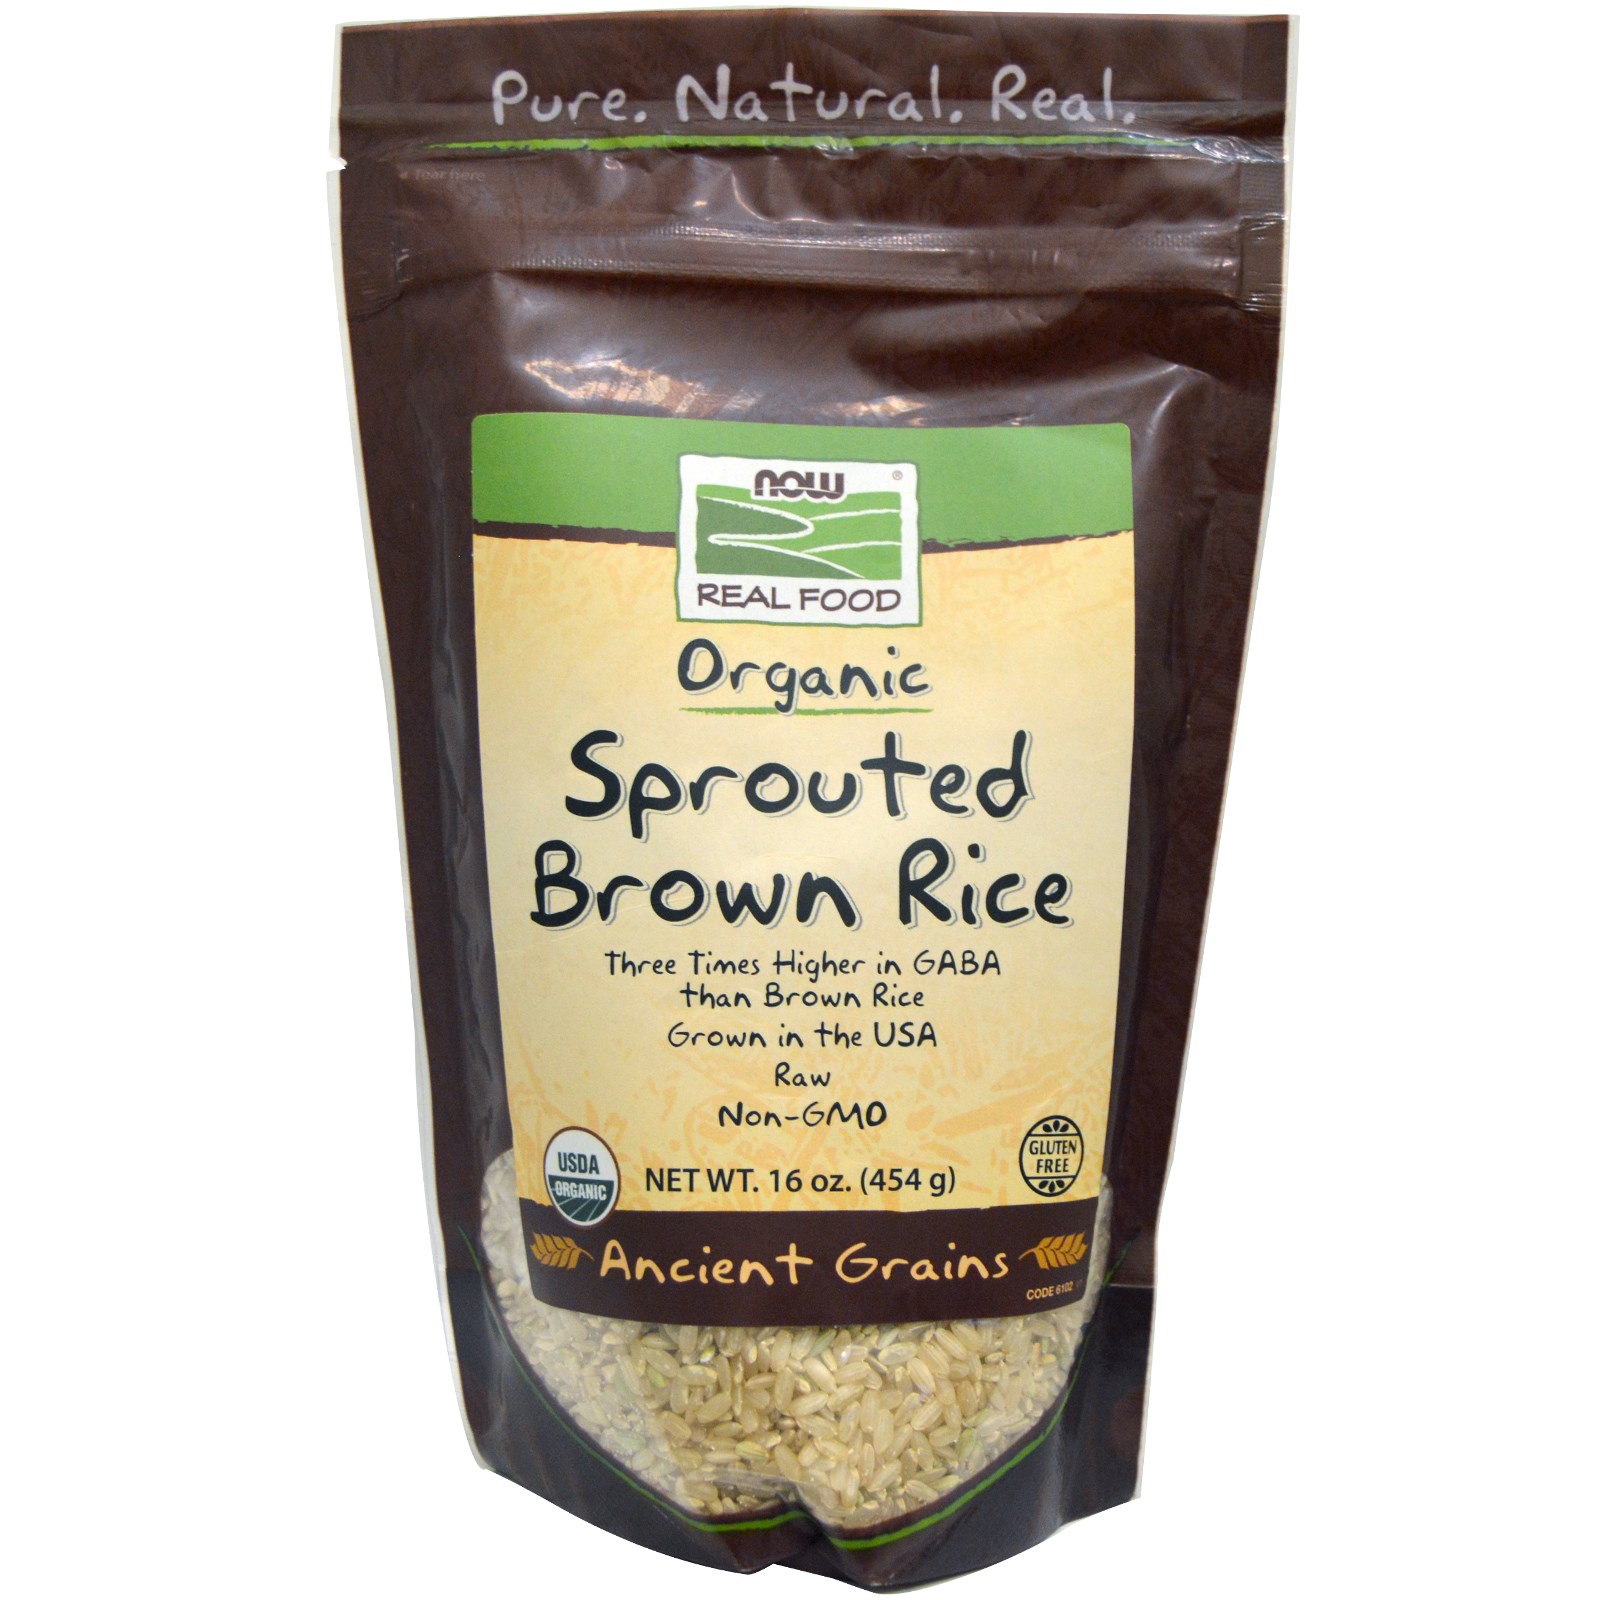 Sprouted Brown Rice, Organic - 16 oz.